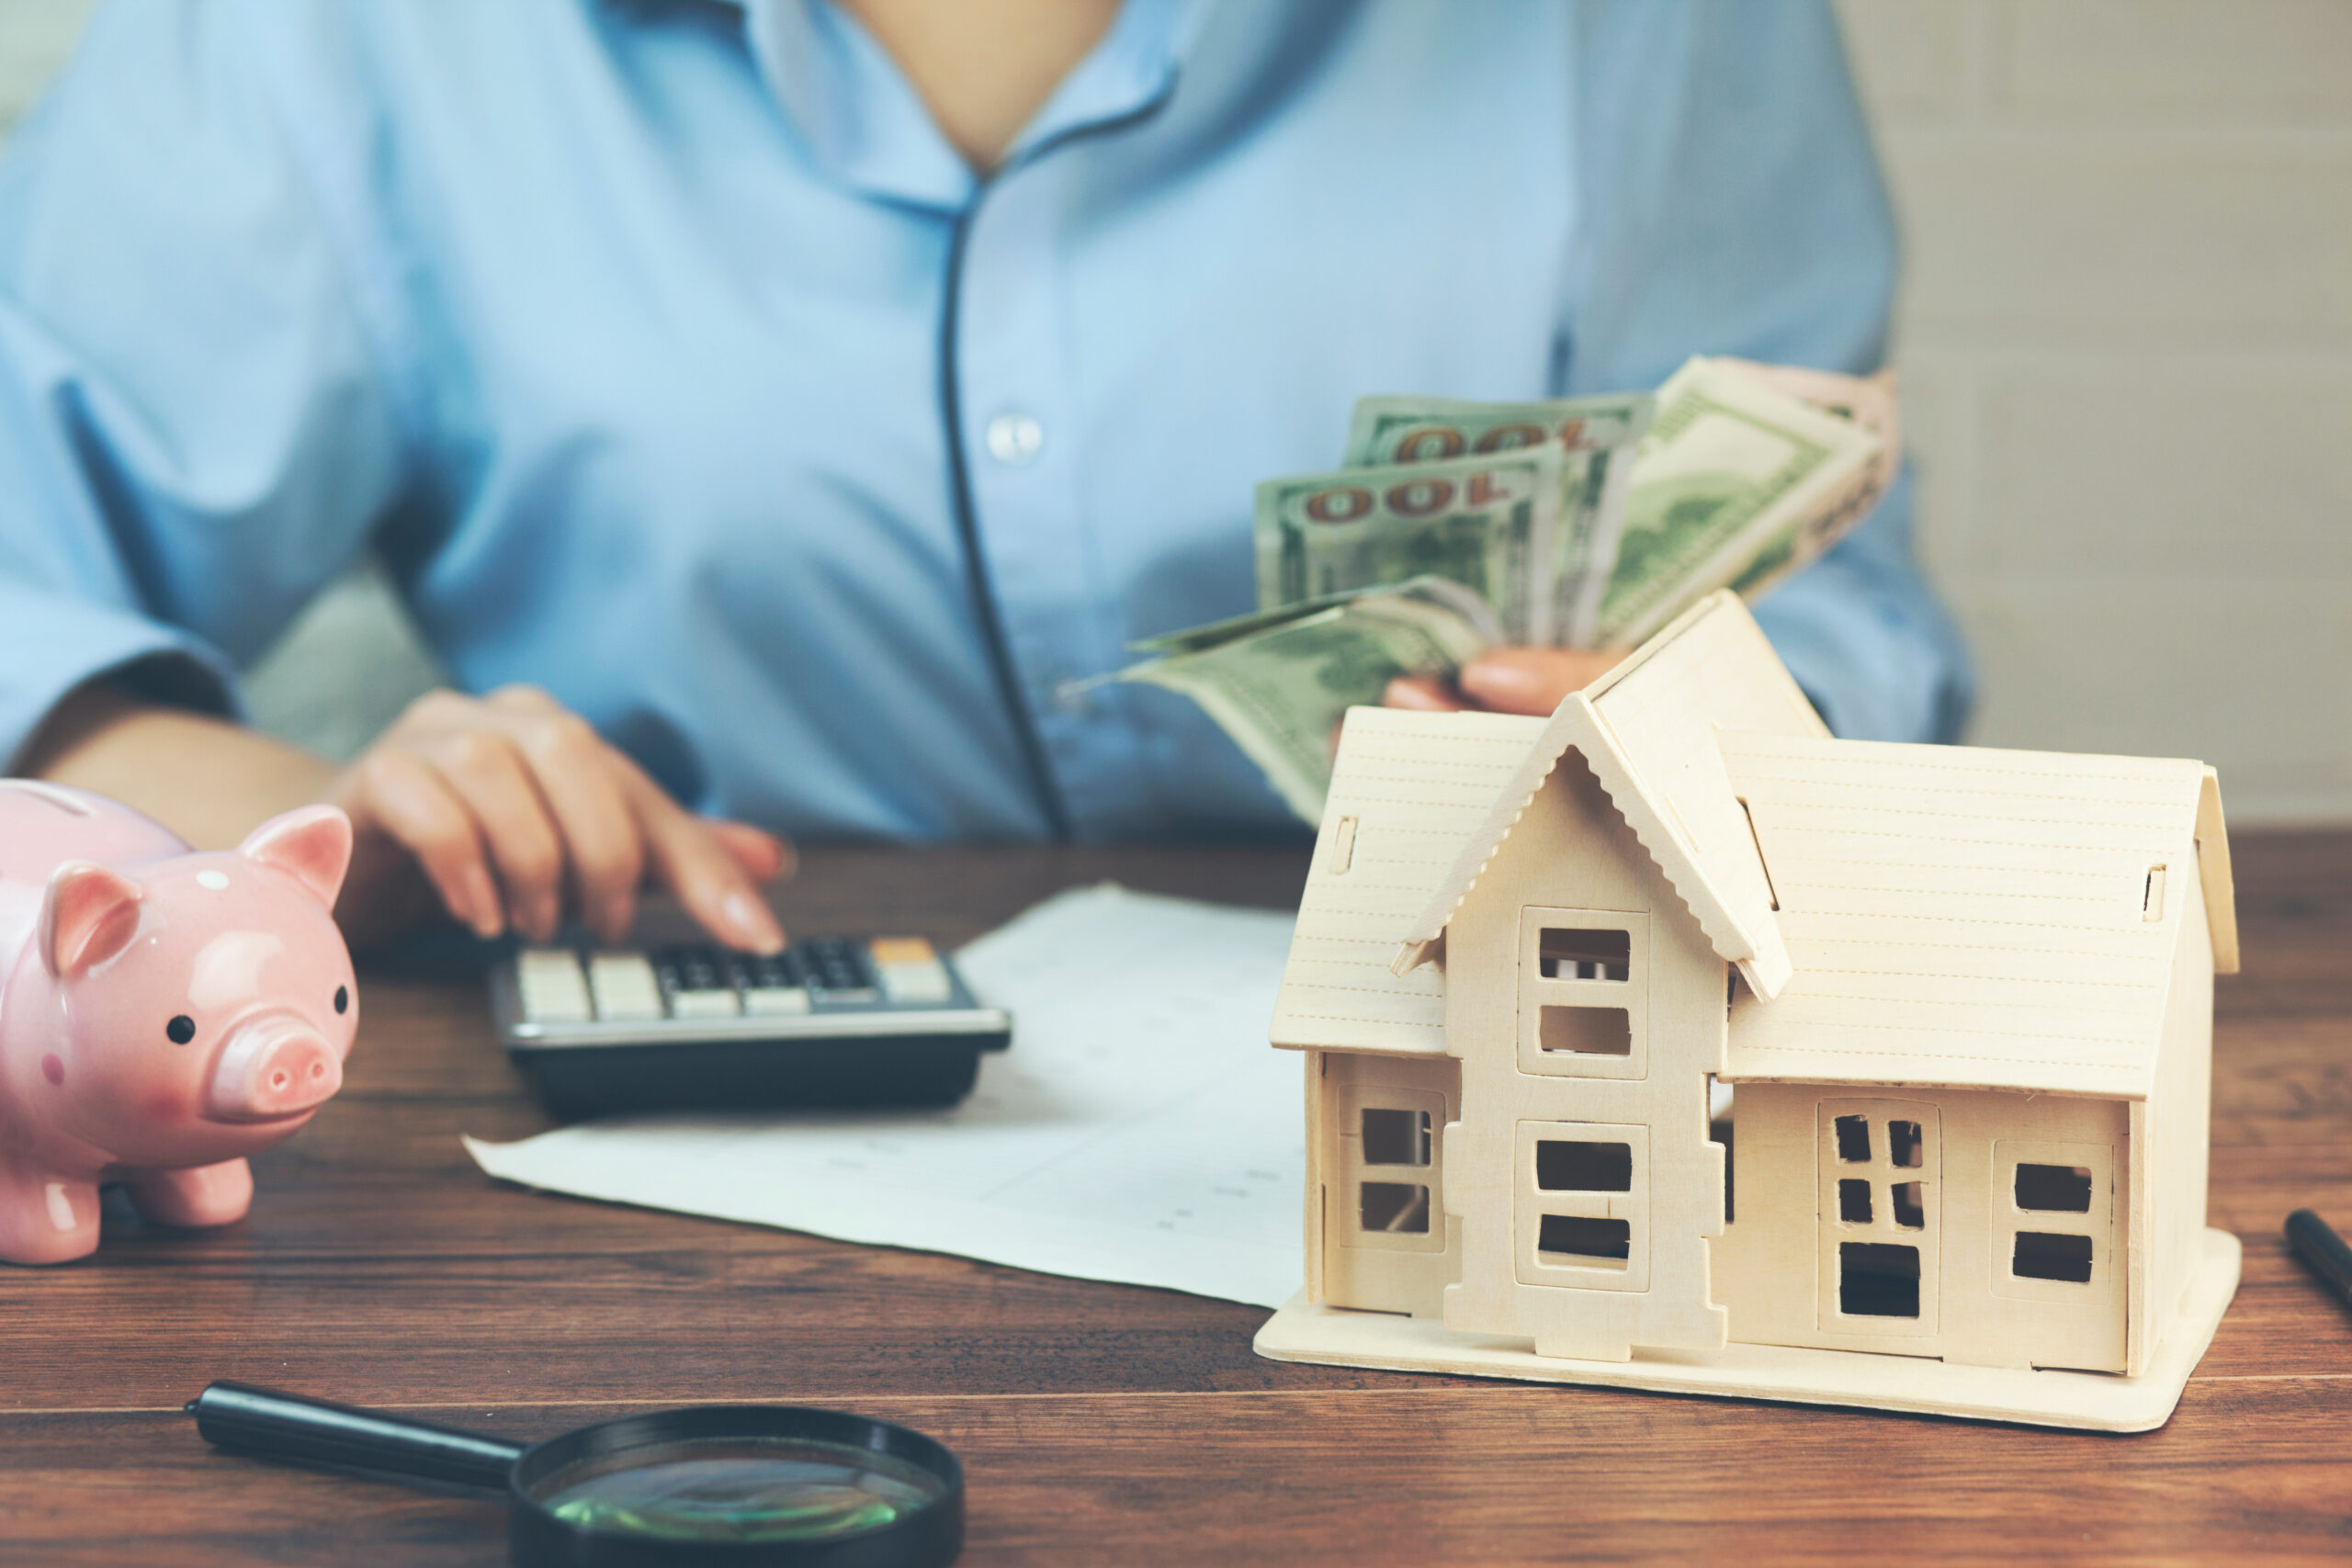 Maintaining Your Home's Value